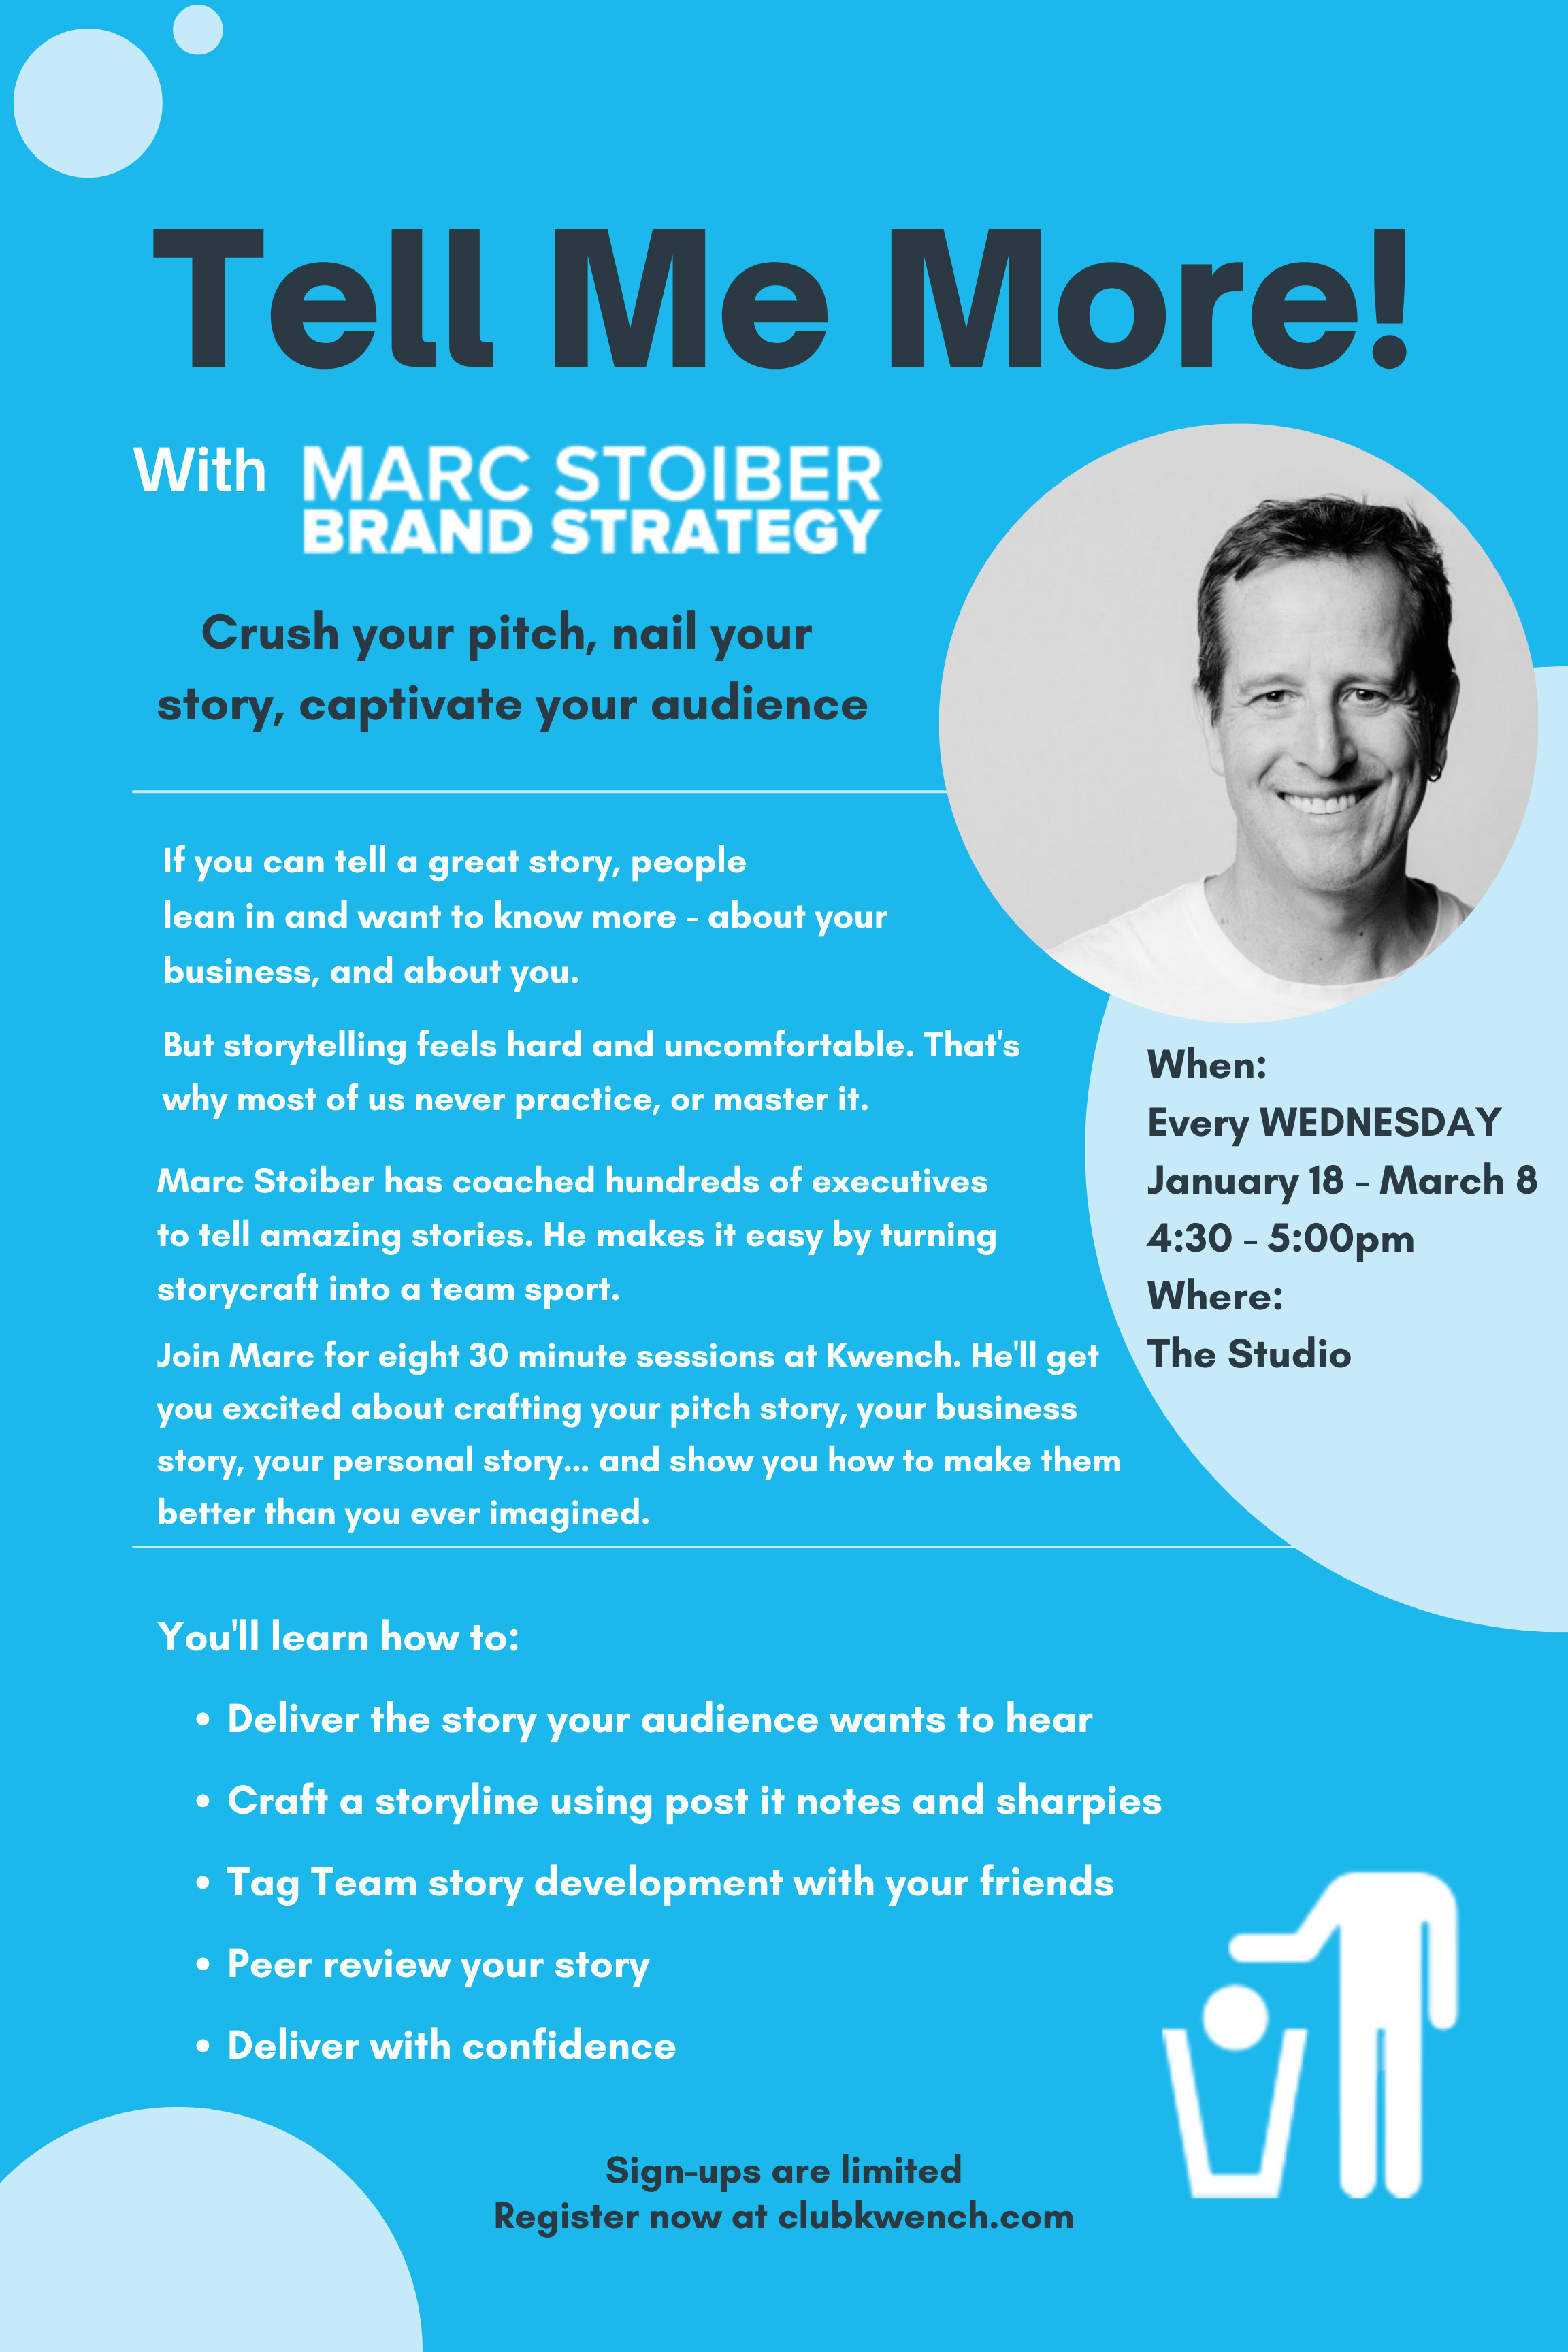 Tell Me More! With MARC STOIBER BRAND STRATEGY